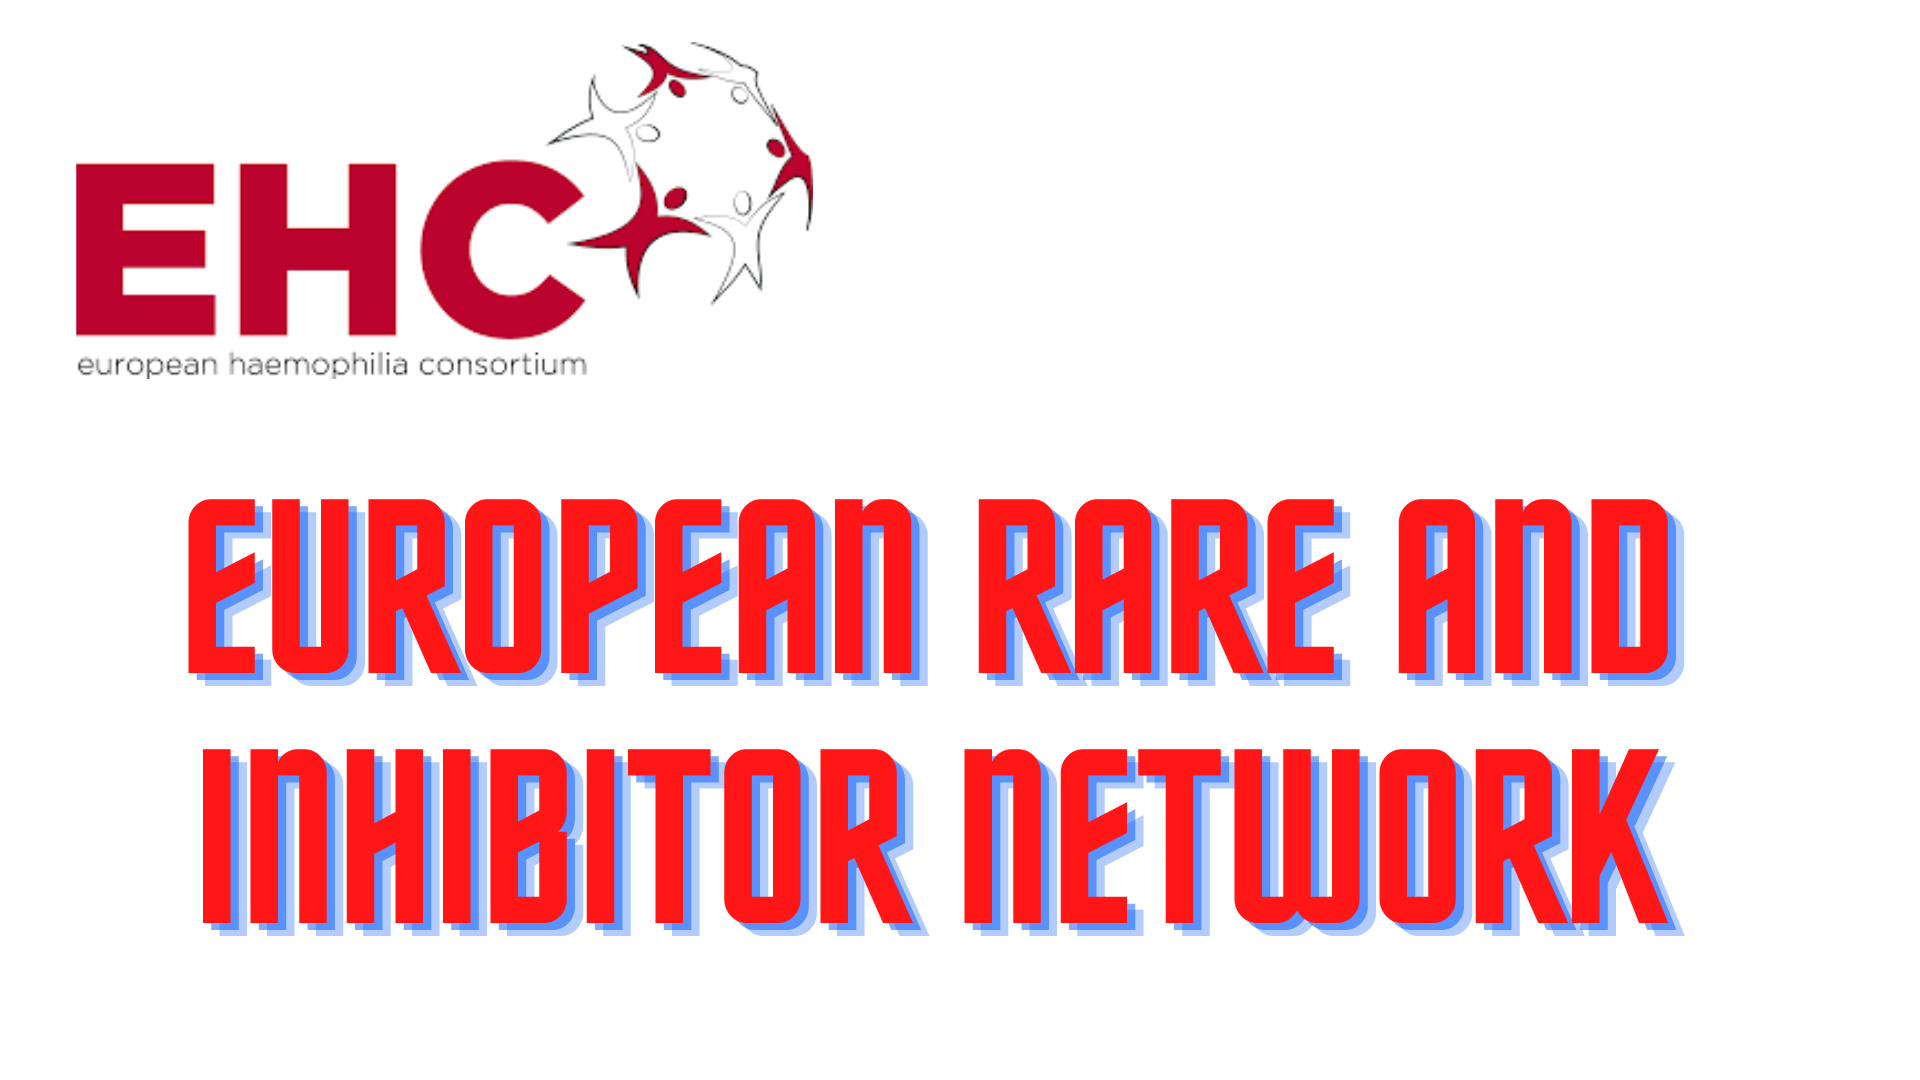 EUROPEAN RARE AND INHIBITOR NETWORKpng